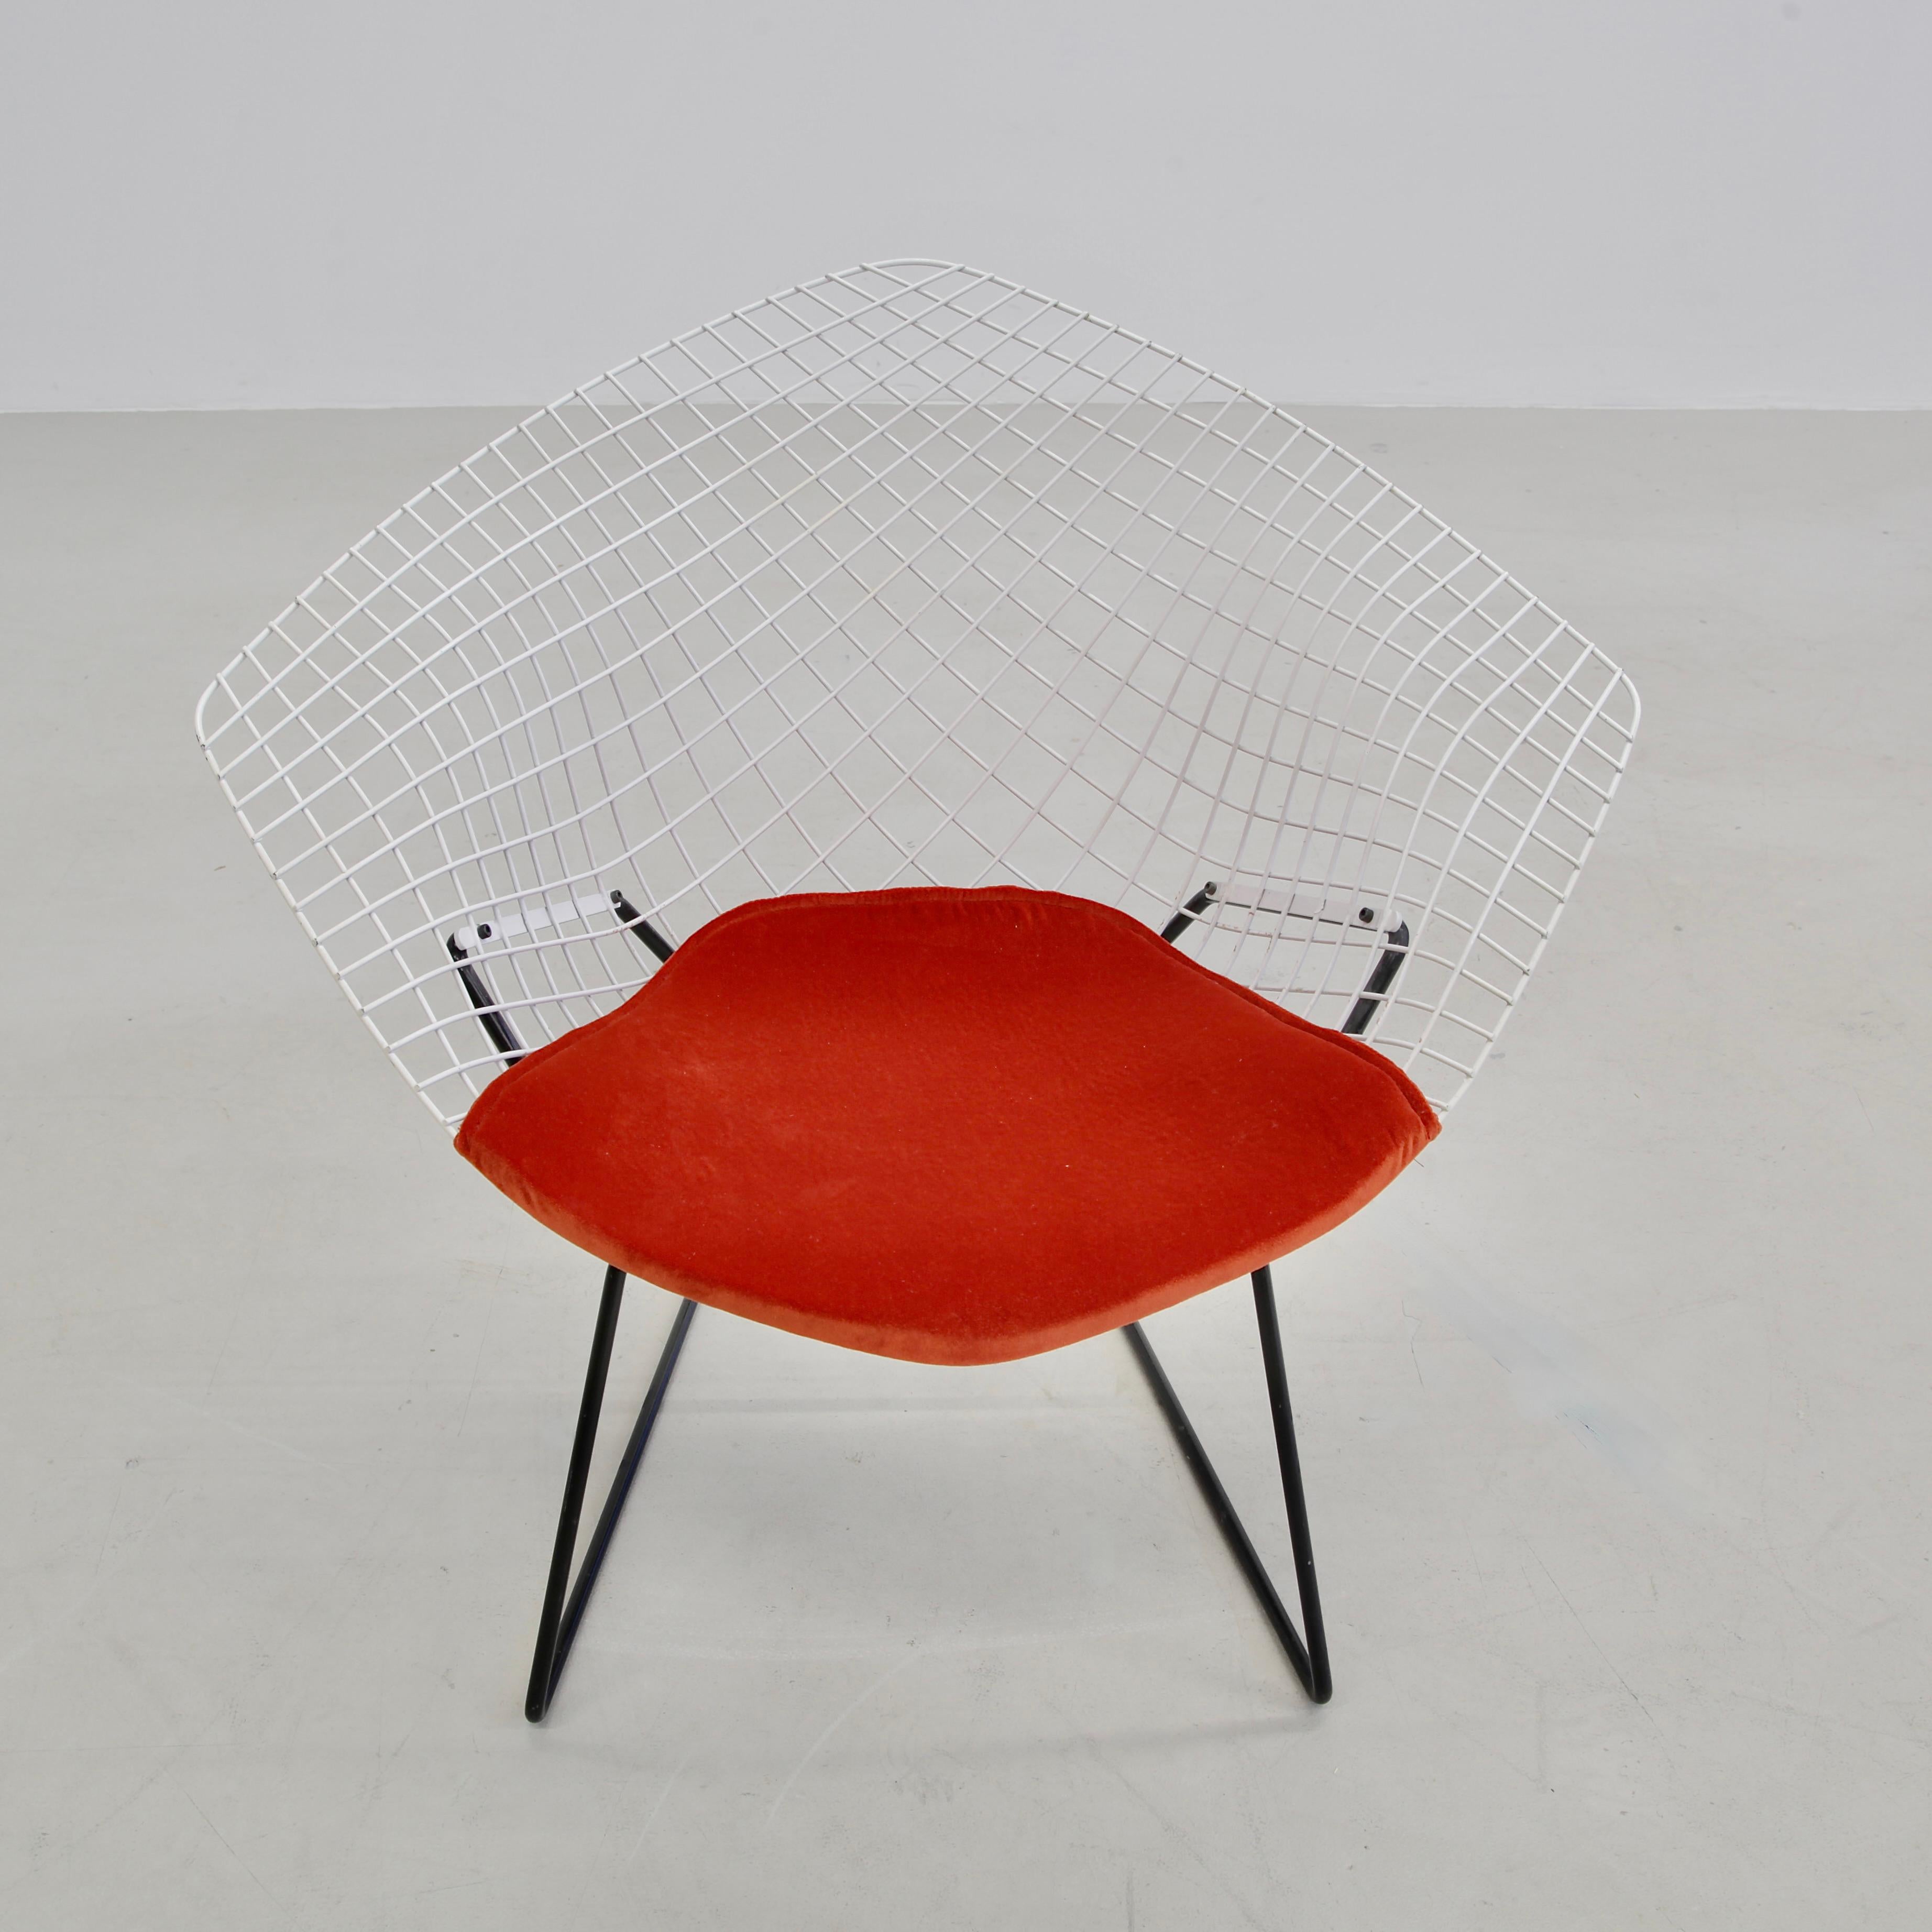 A pair of original Diamond Chairs, designed by Harry Bertoia. U.S.A., Knoll International, 1970s

Early production Diamond chairs in white and black painted metal with rust-orange velvet pads.

The Bertoia Diamond Armchair, originally designed in